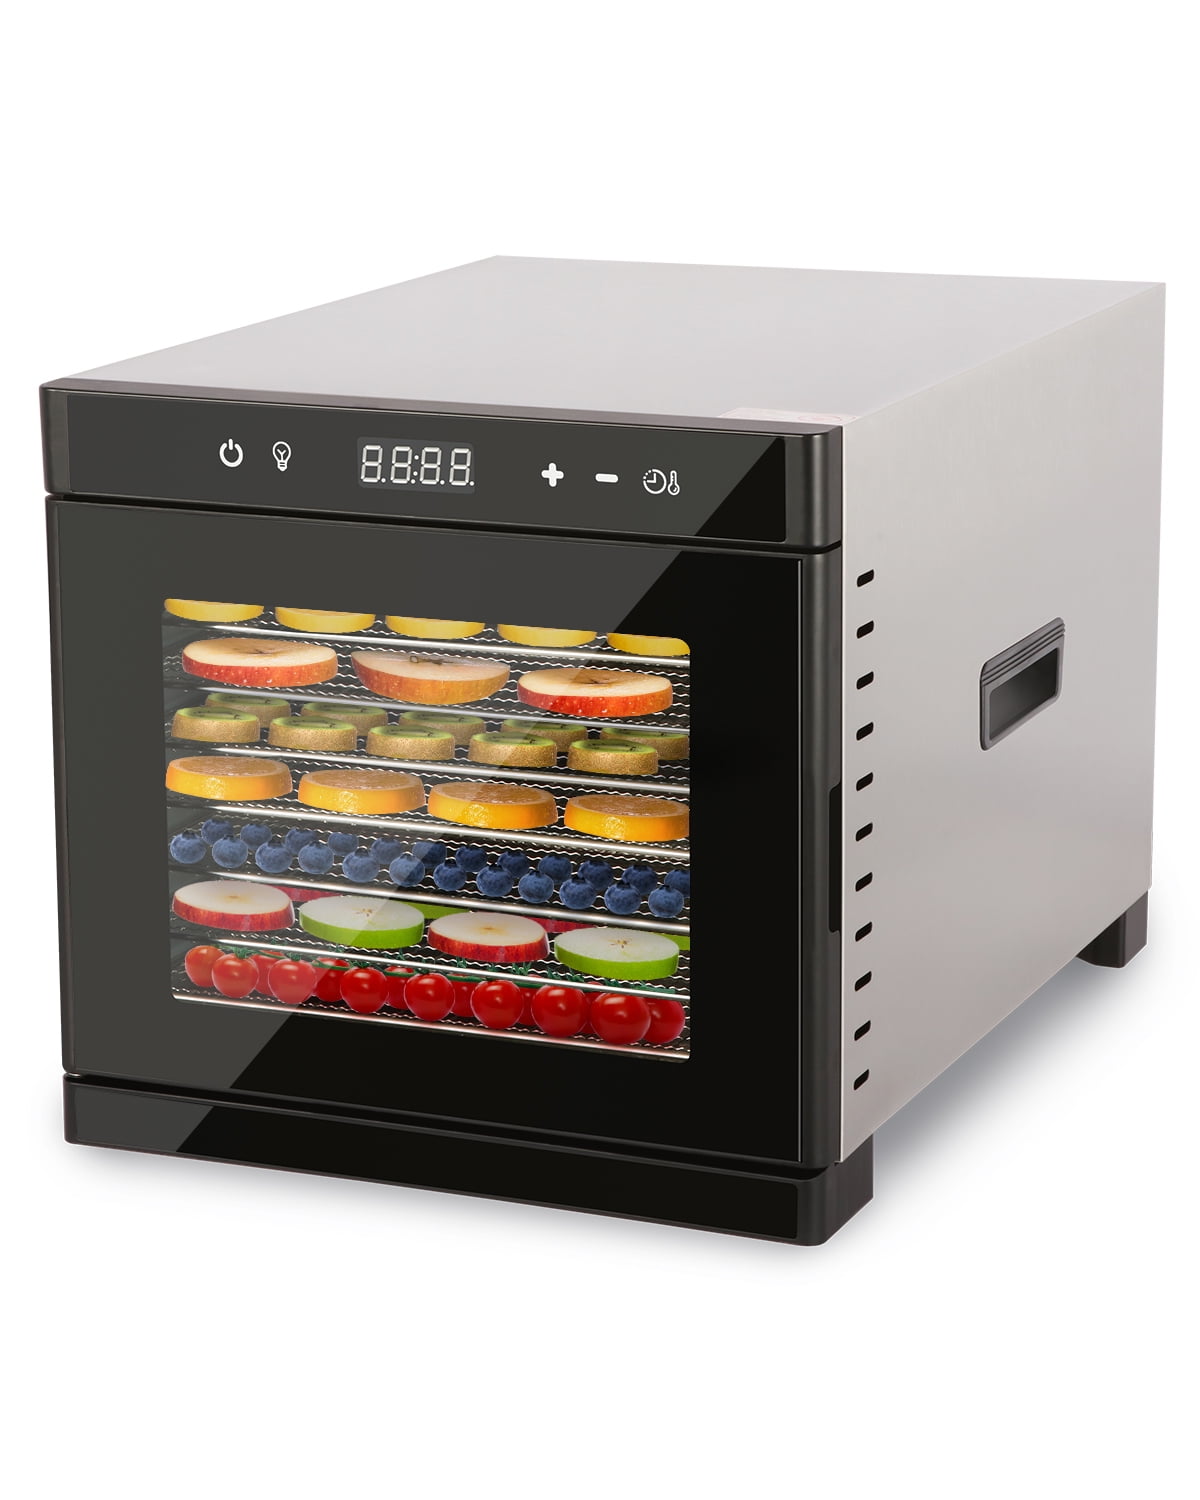 Exceptional food dehydrator ts 9688 3 a 01 At Unbeatable Discounts 